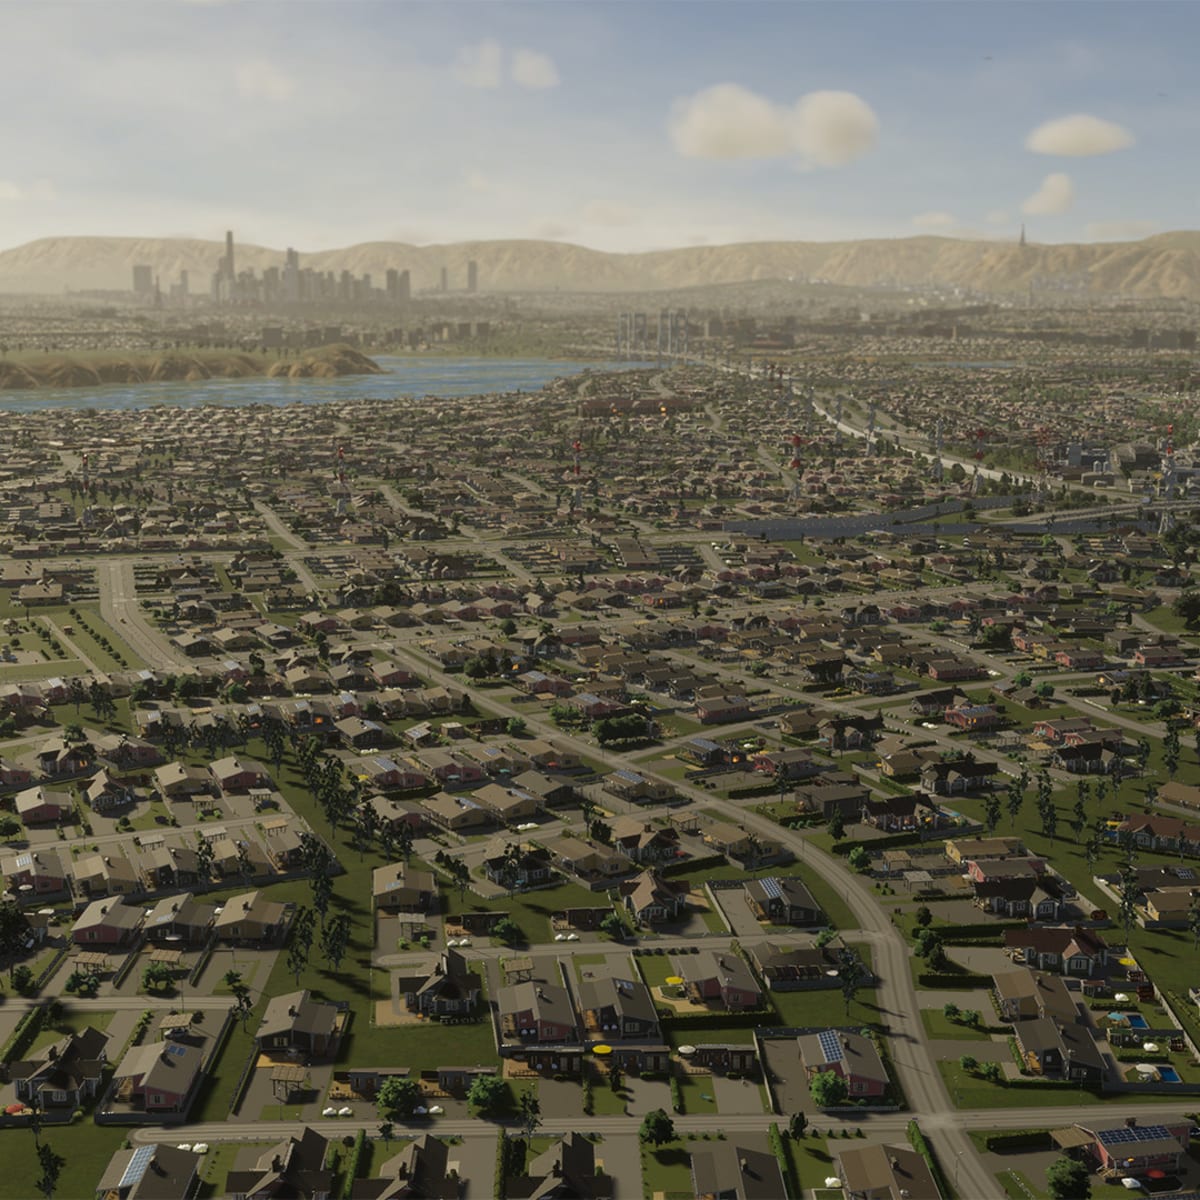 Every Fix Coming To Cities: Skylines 2 After Release